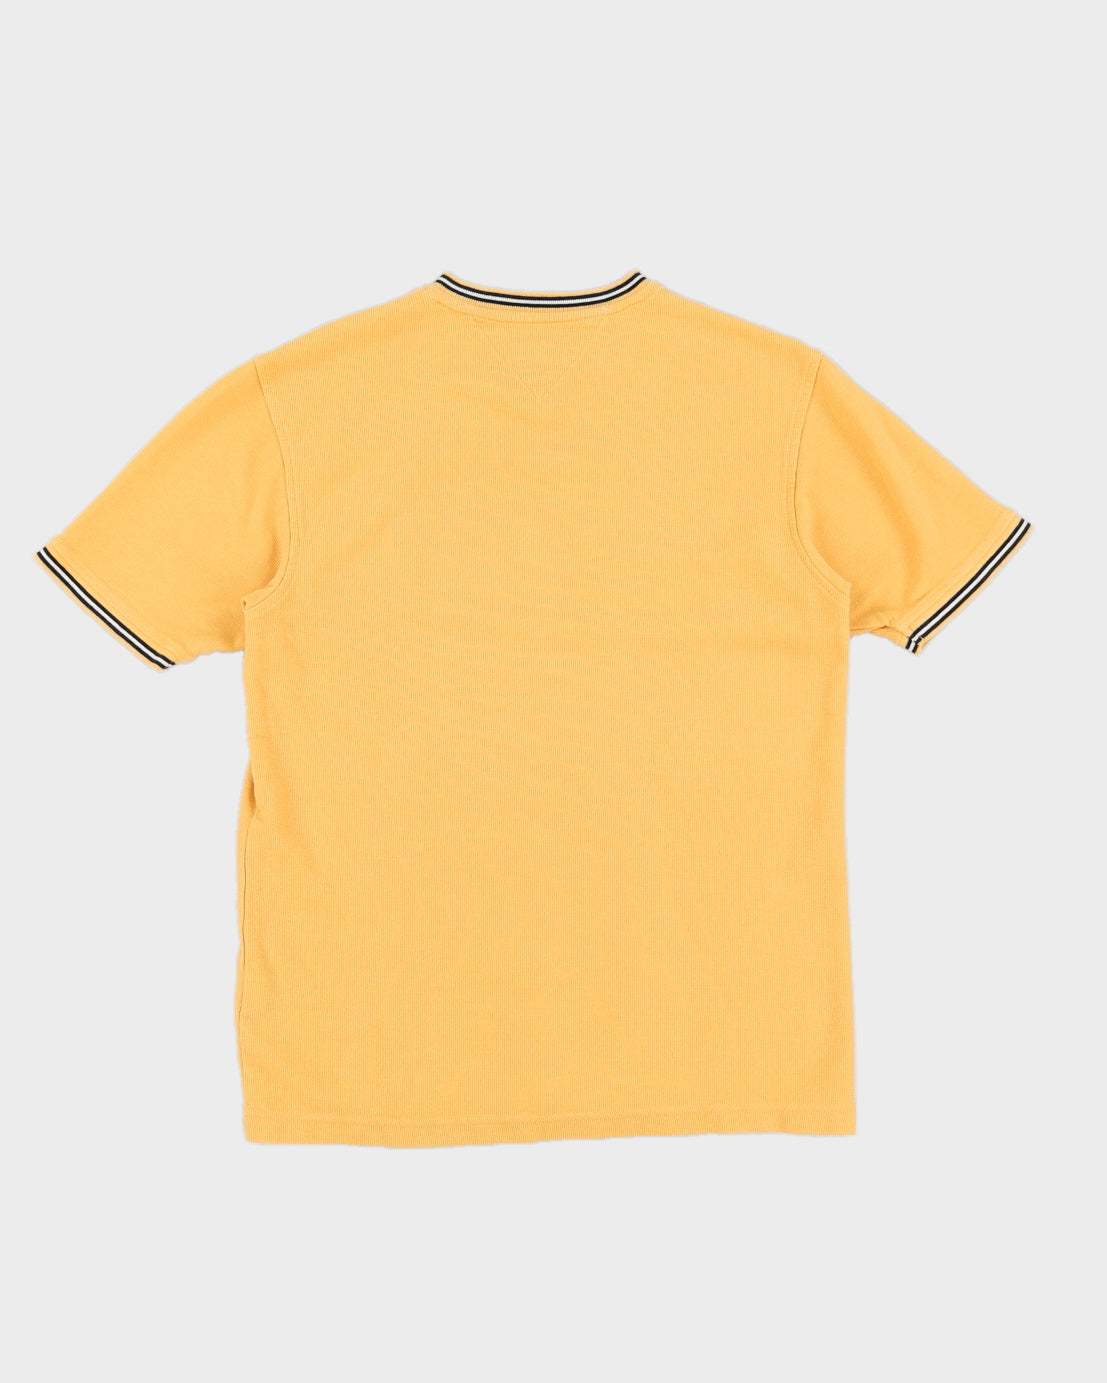 00s Y2K Tommy Hilfiger Yellow T-Shirt - M